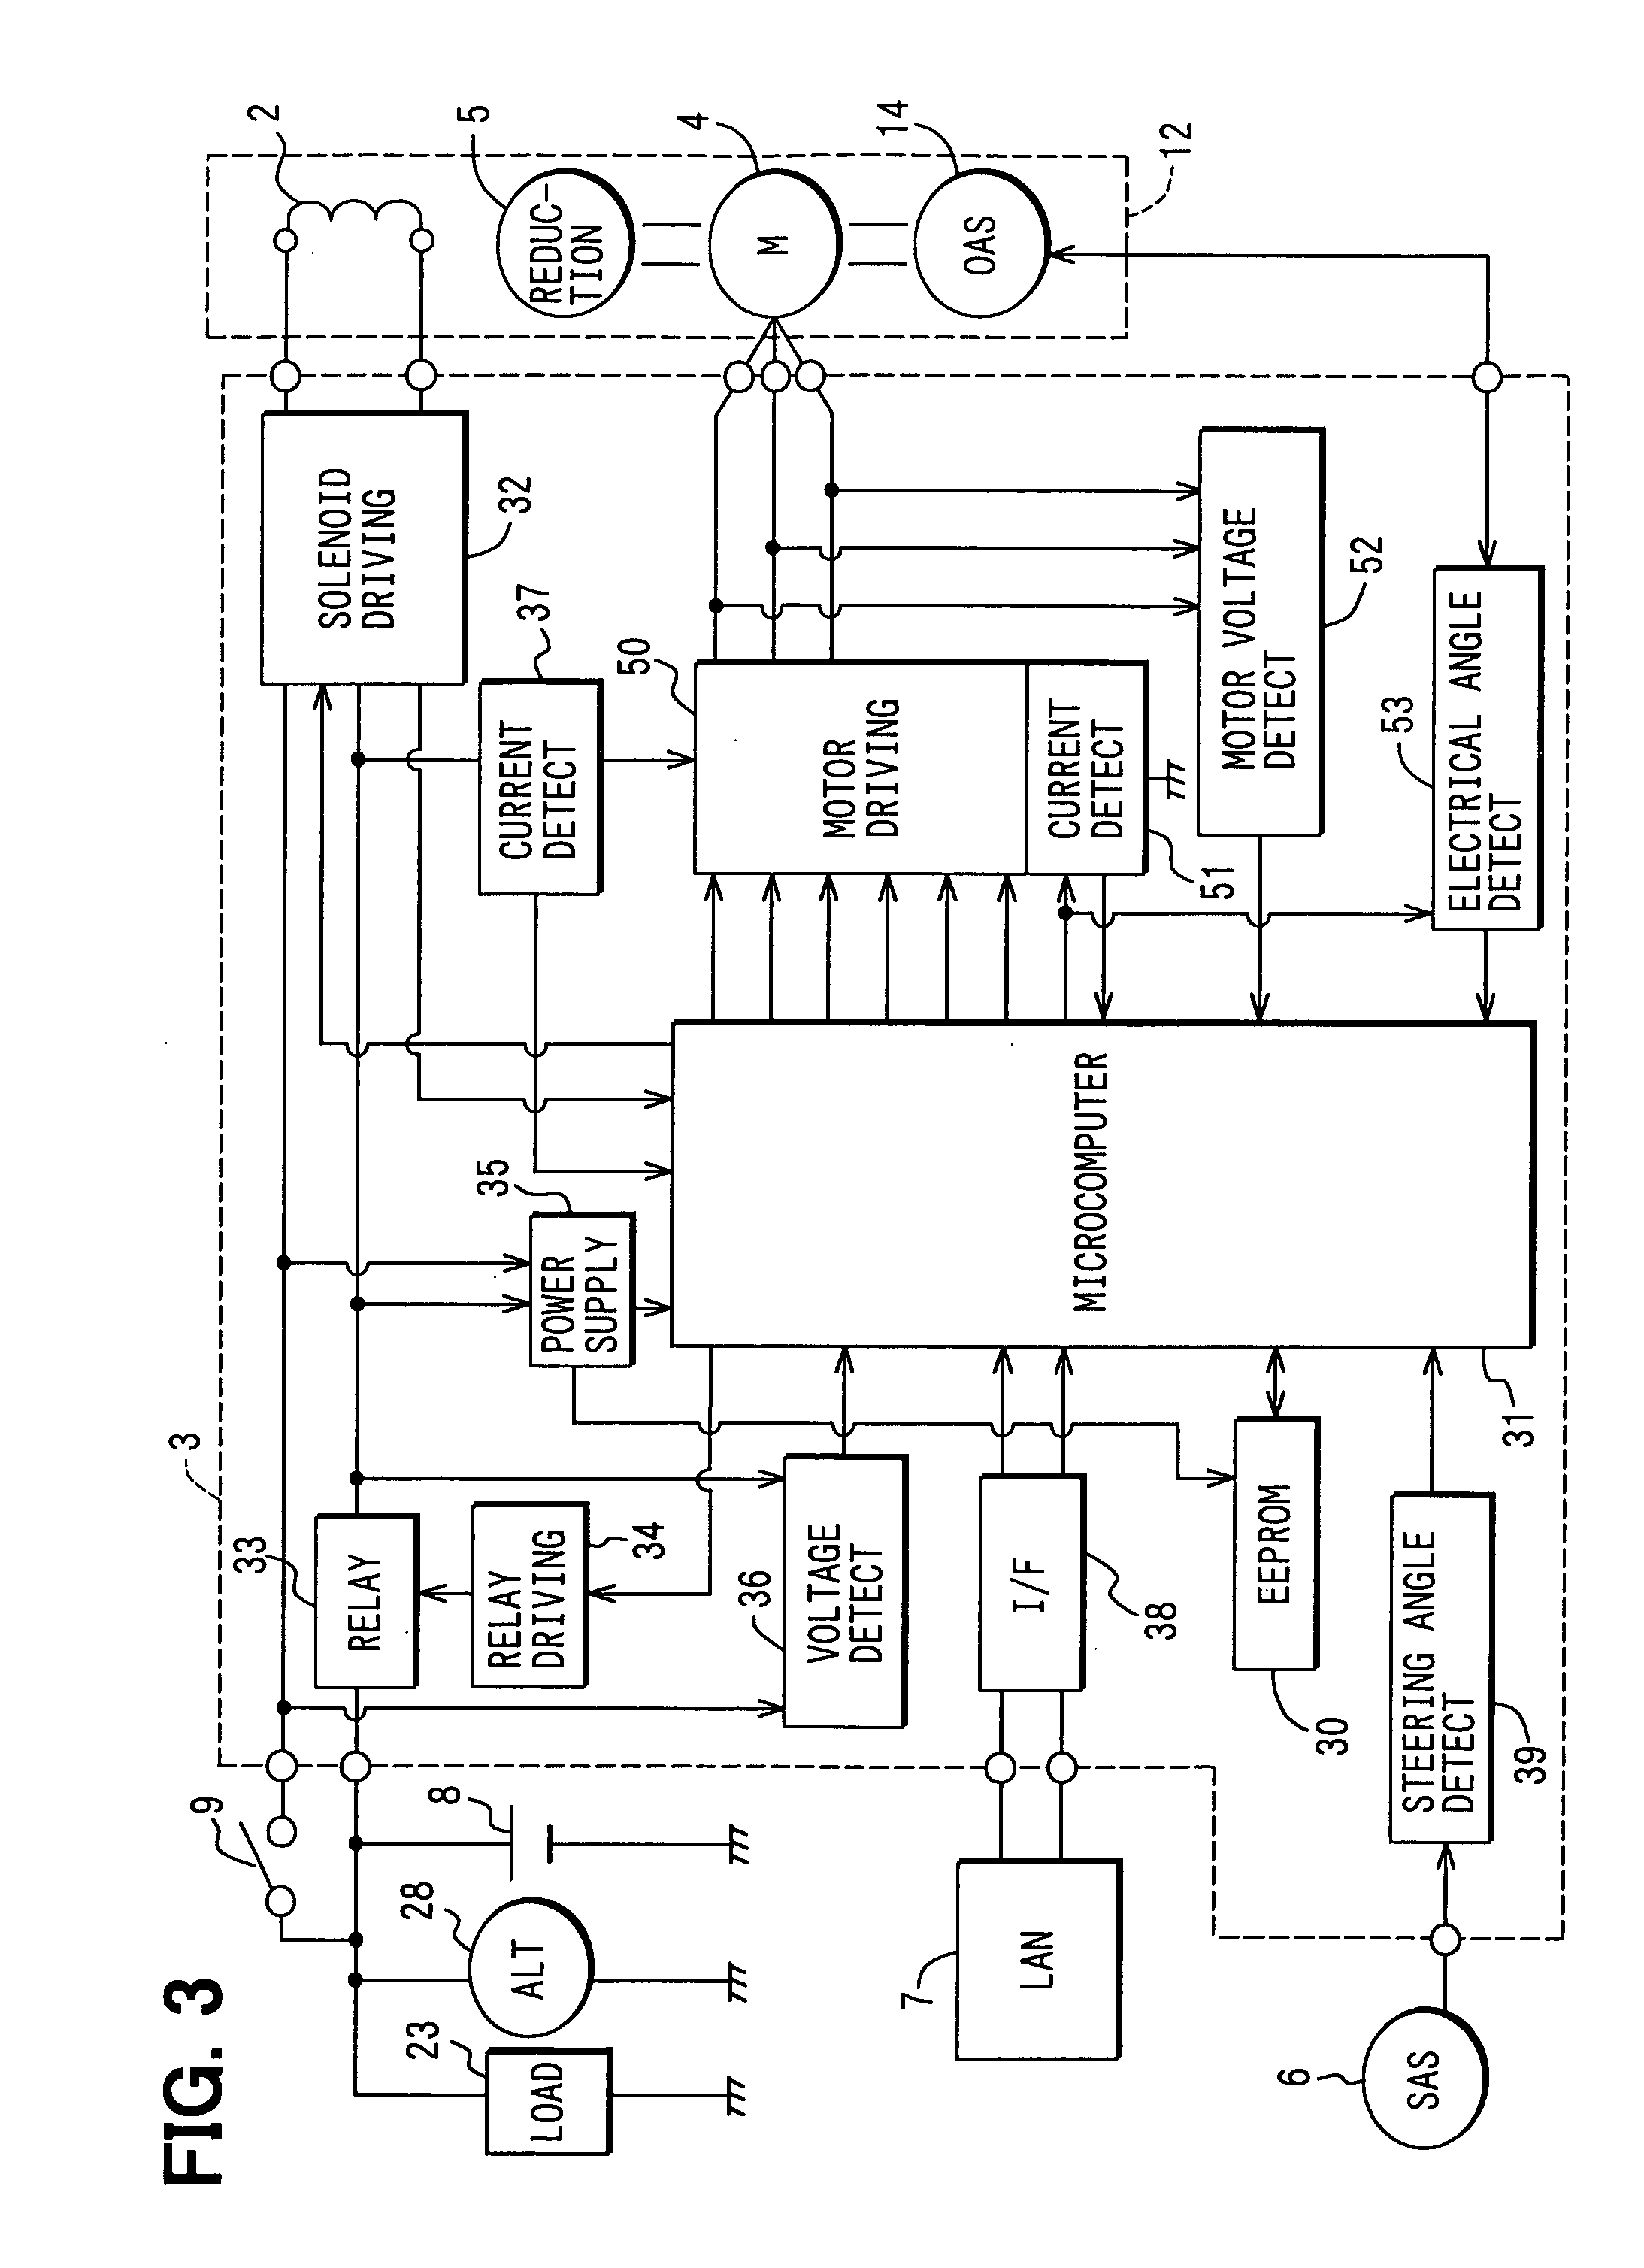 Electronic control system having power source relay fusion detecting circuit